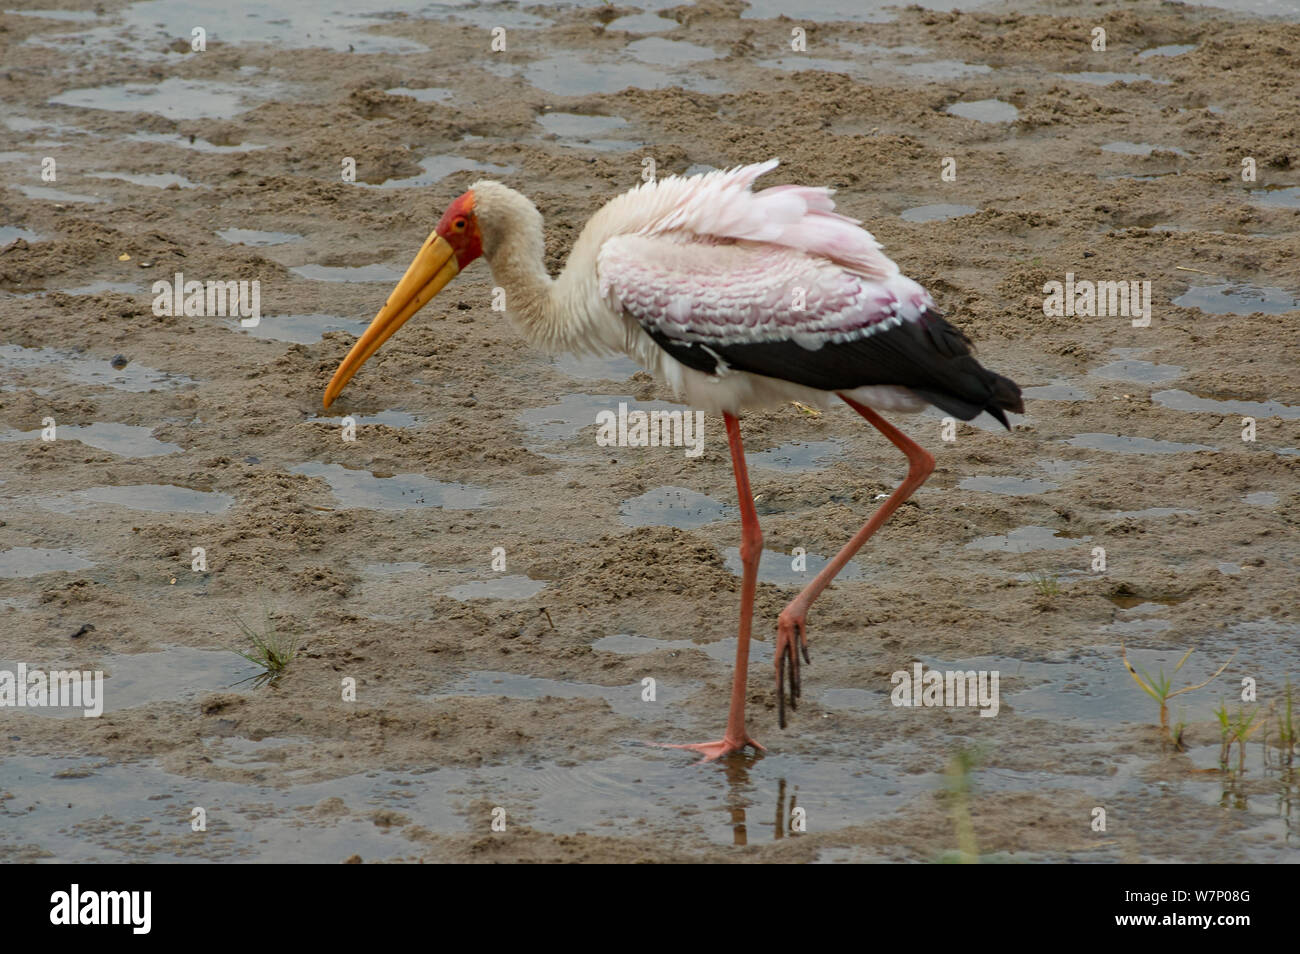 A 'glutton' Yellow Billed Stork wading a muddy river bed in search for food Stock Photo